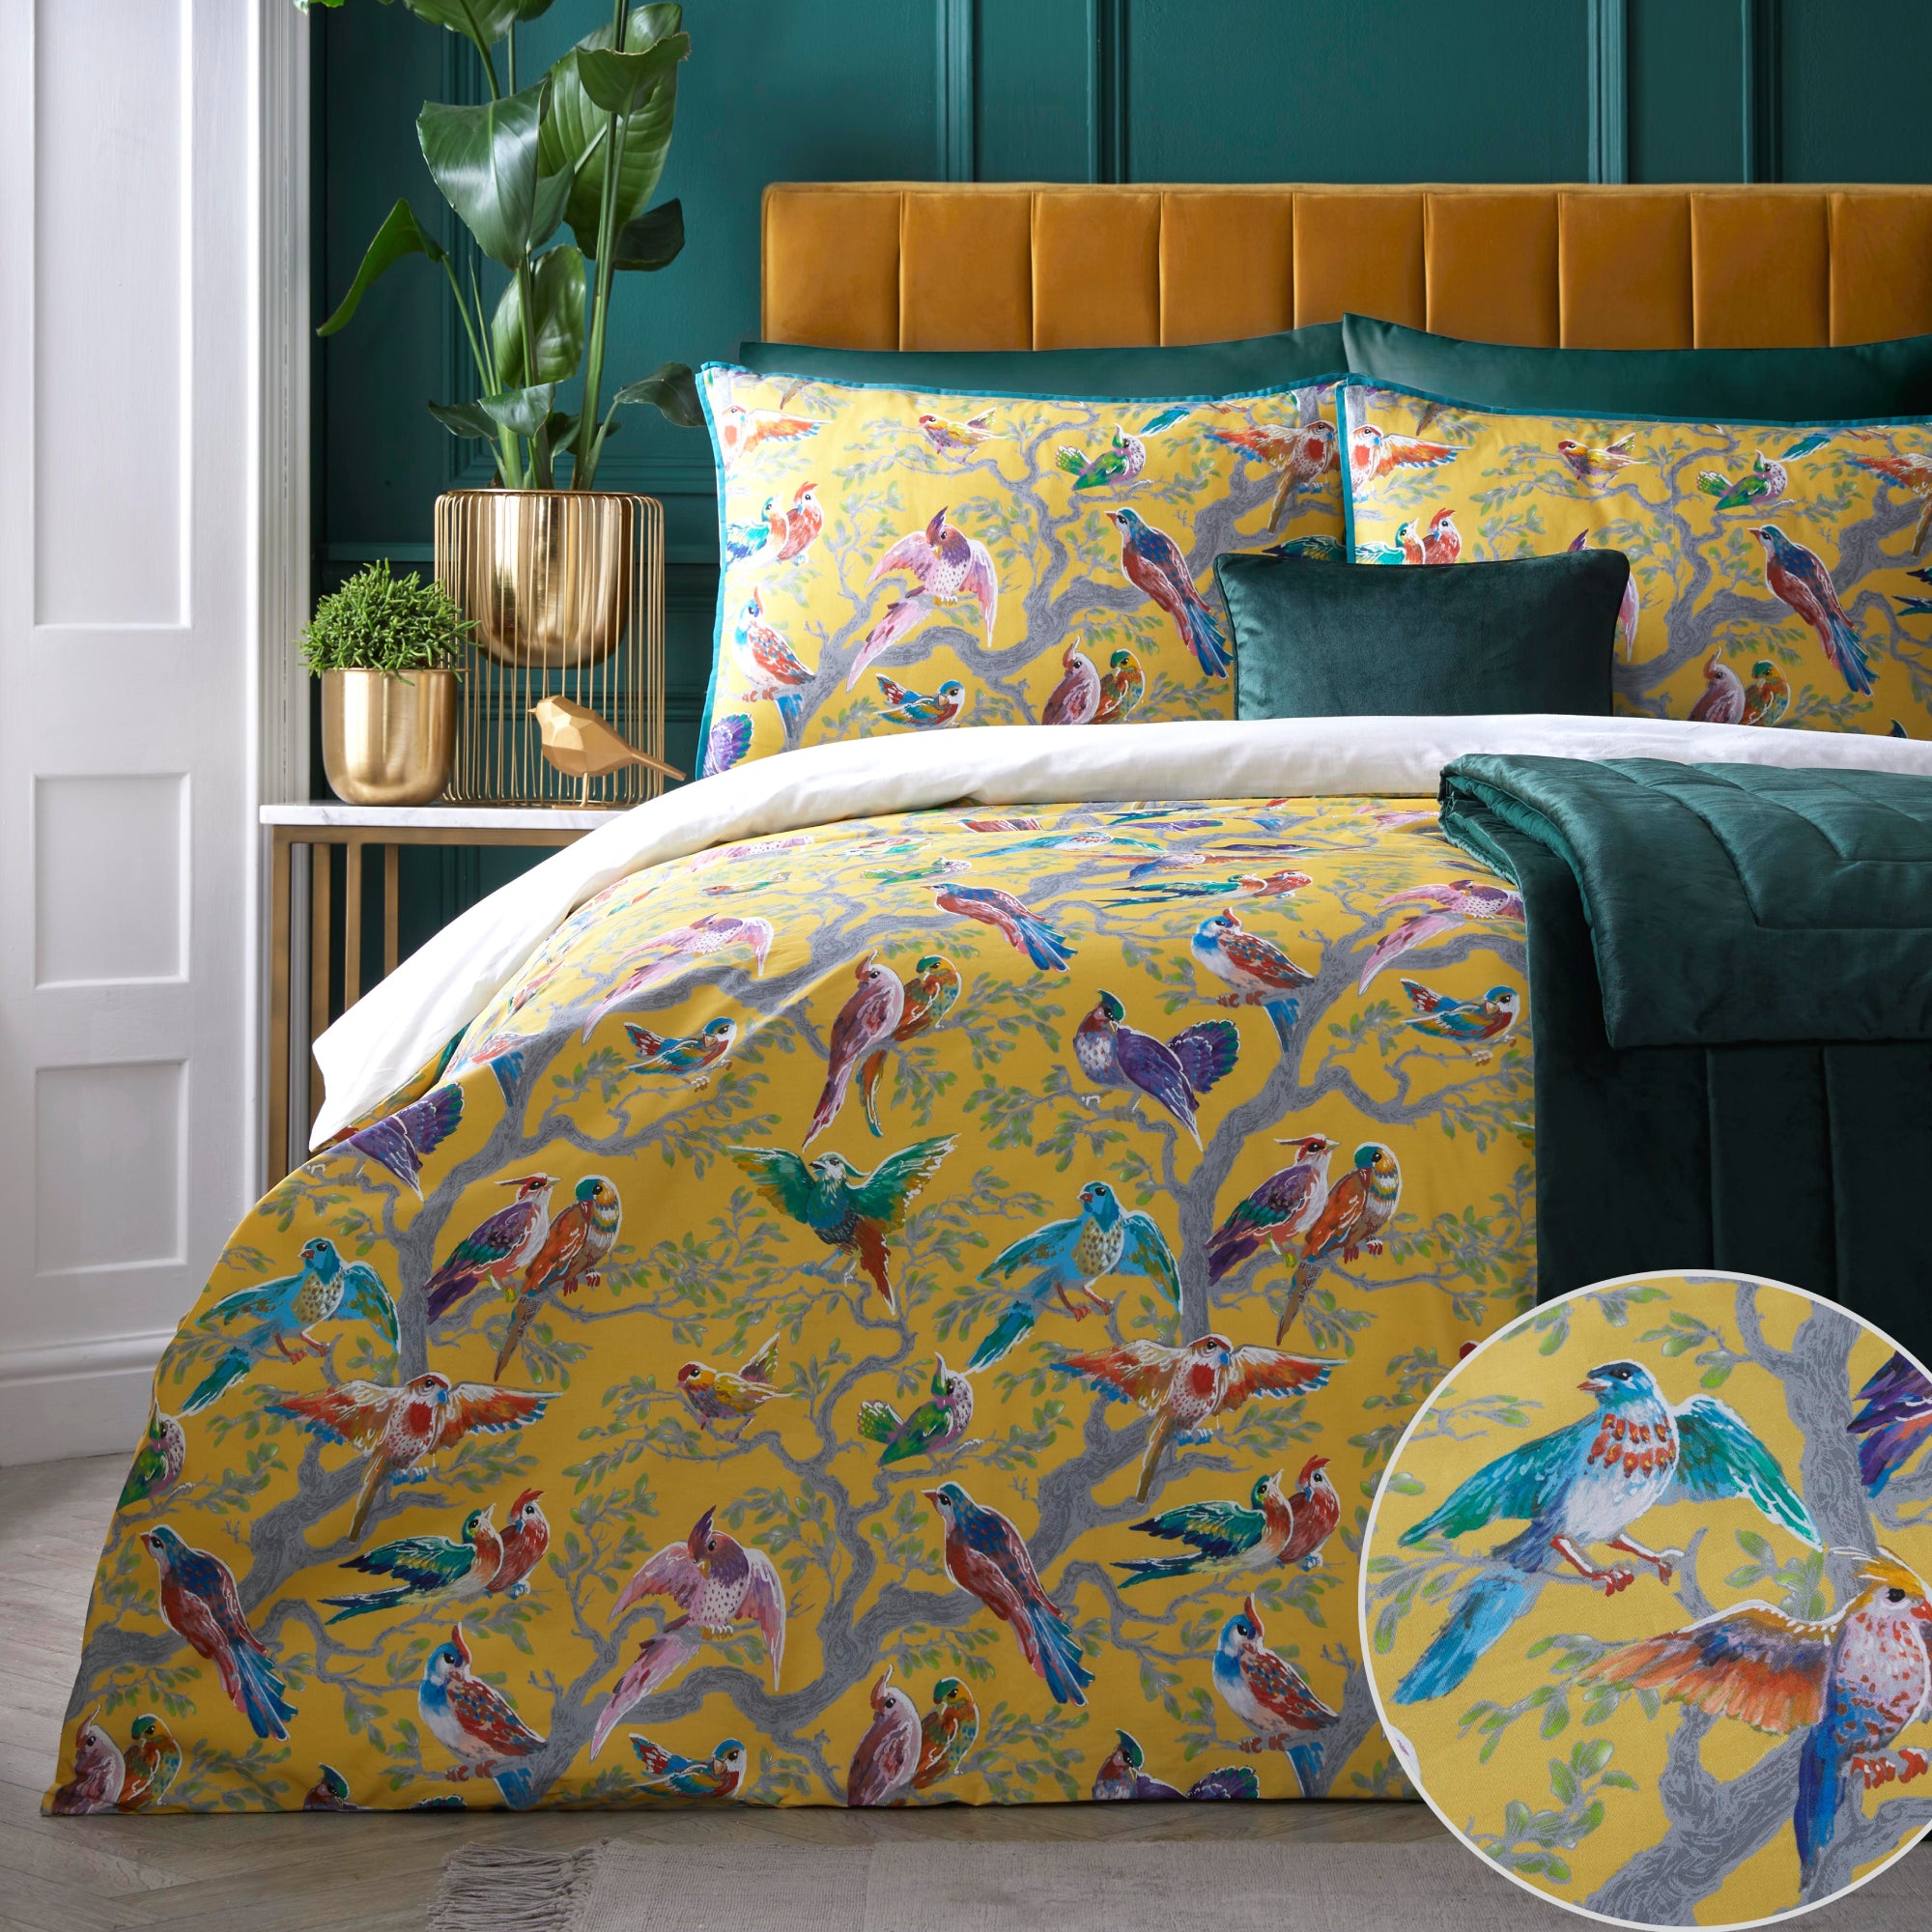 Duvet Cover Set Birdity Absurdity by Laurence Llewelyn-Bowen in Yellow